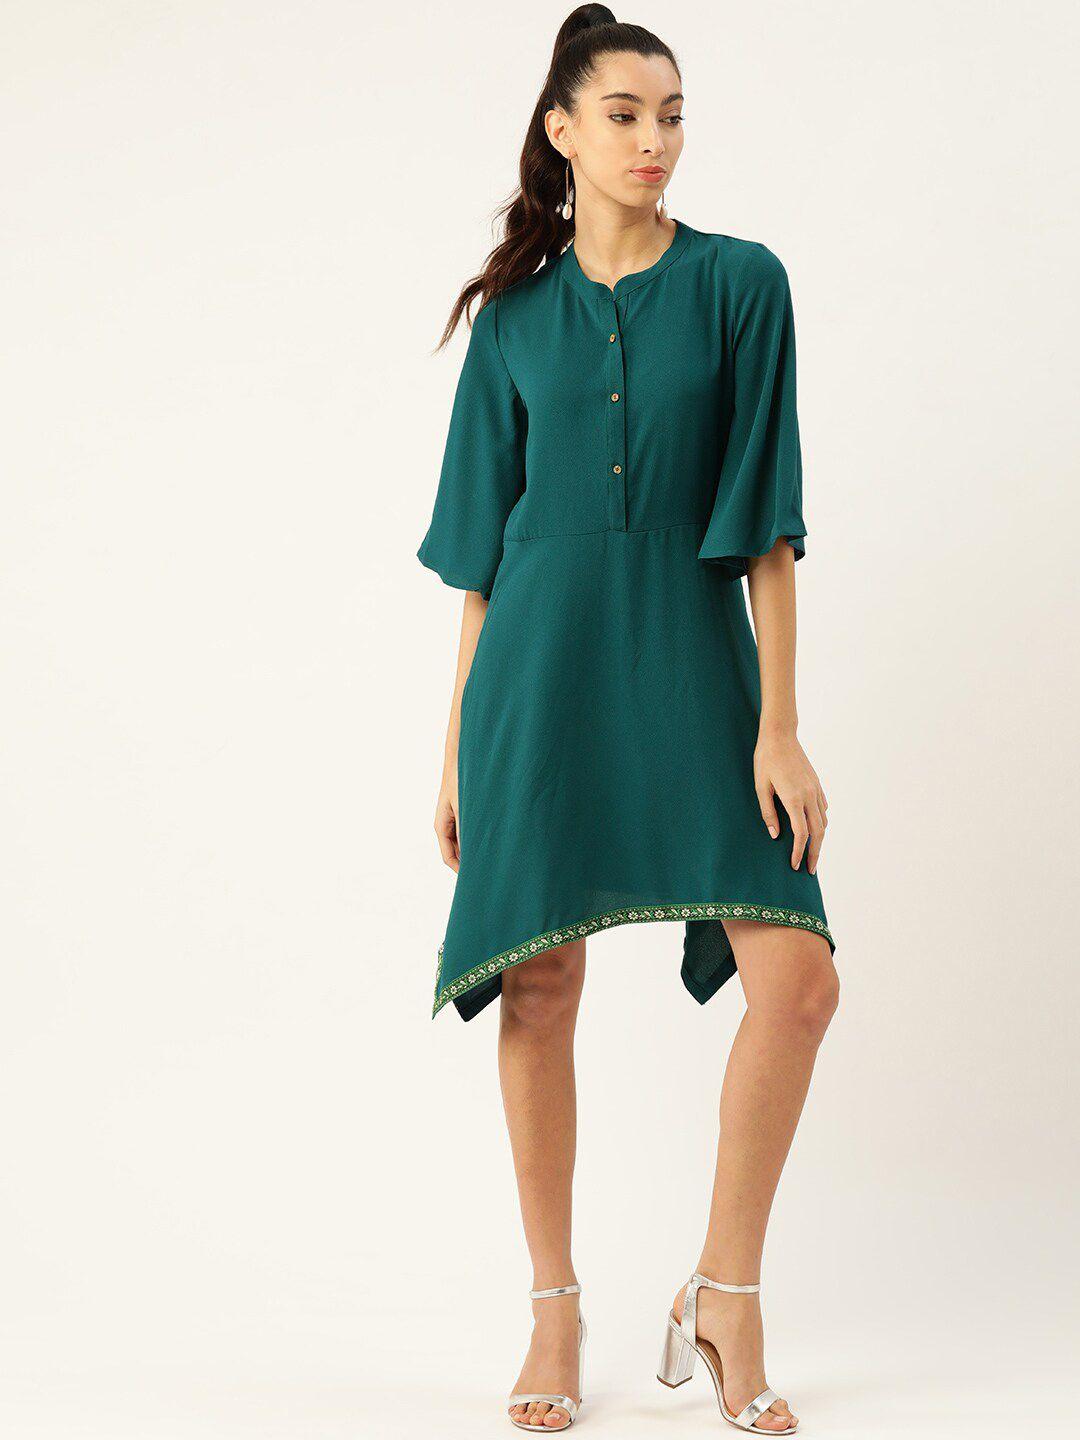 dodo & moa women teal solid flared sleeves a-line dress